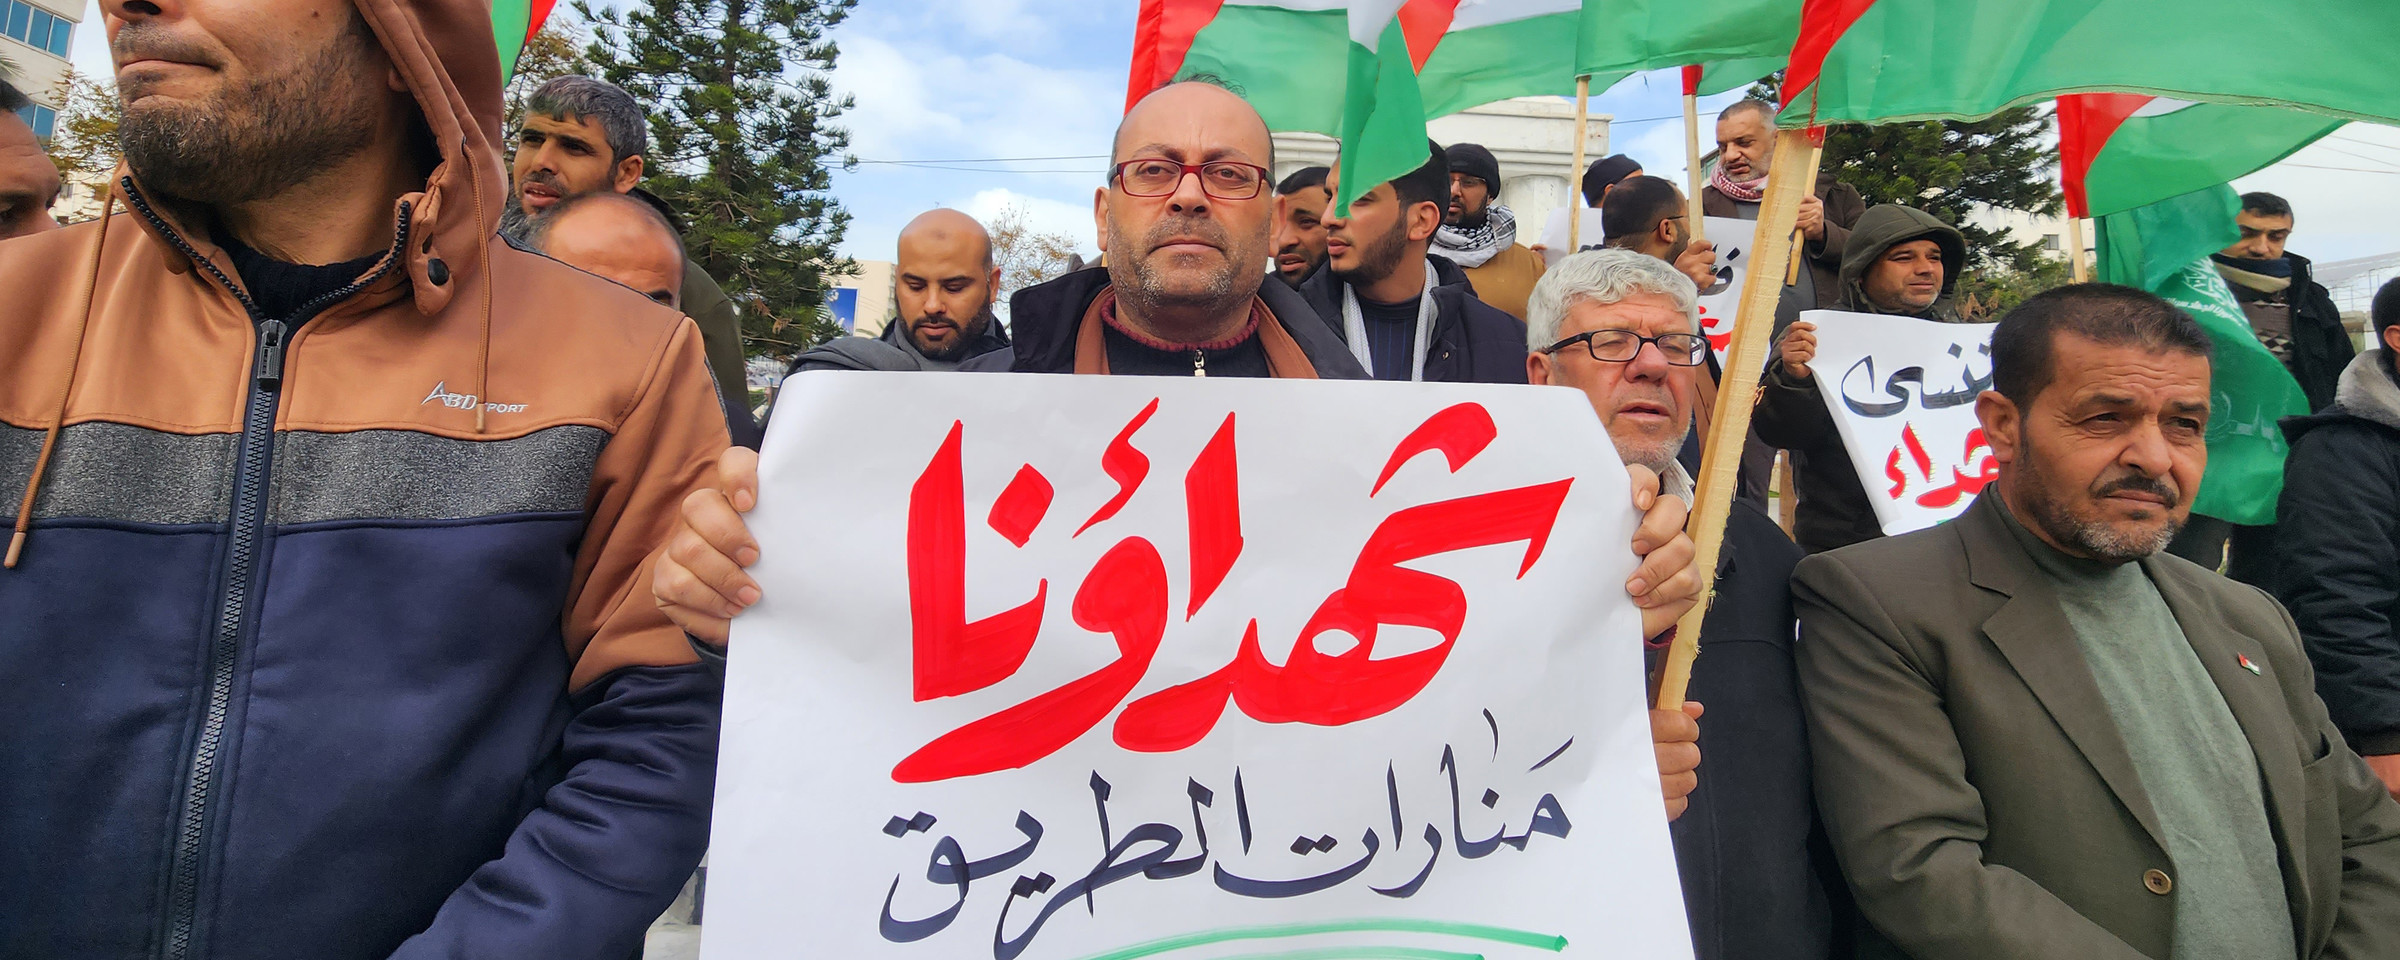 Man holds Arabic-language sign in crowd holding Palestine flags